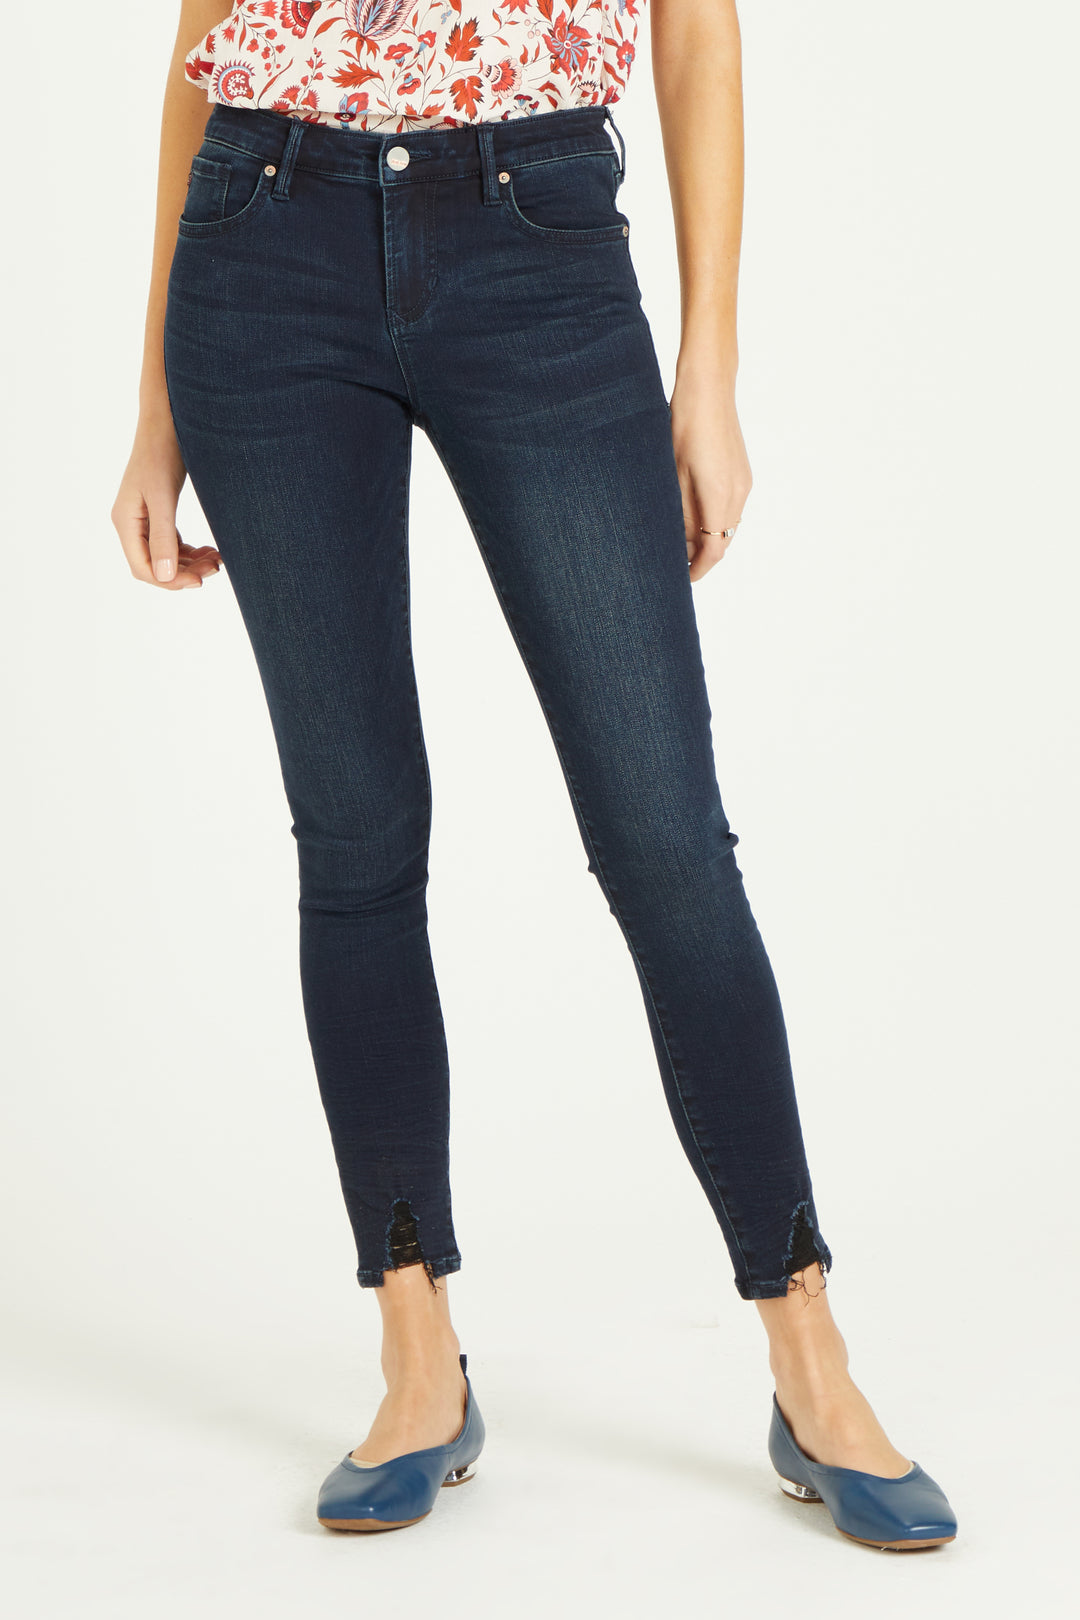 image of a female model wearing a 9 1/2" HIGH RISE GISELE SKINNY BELAIR JEANS